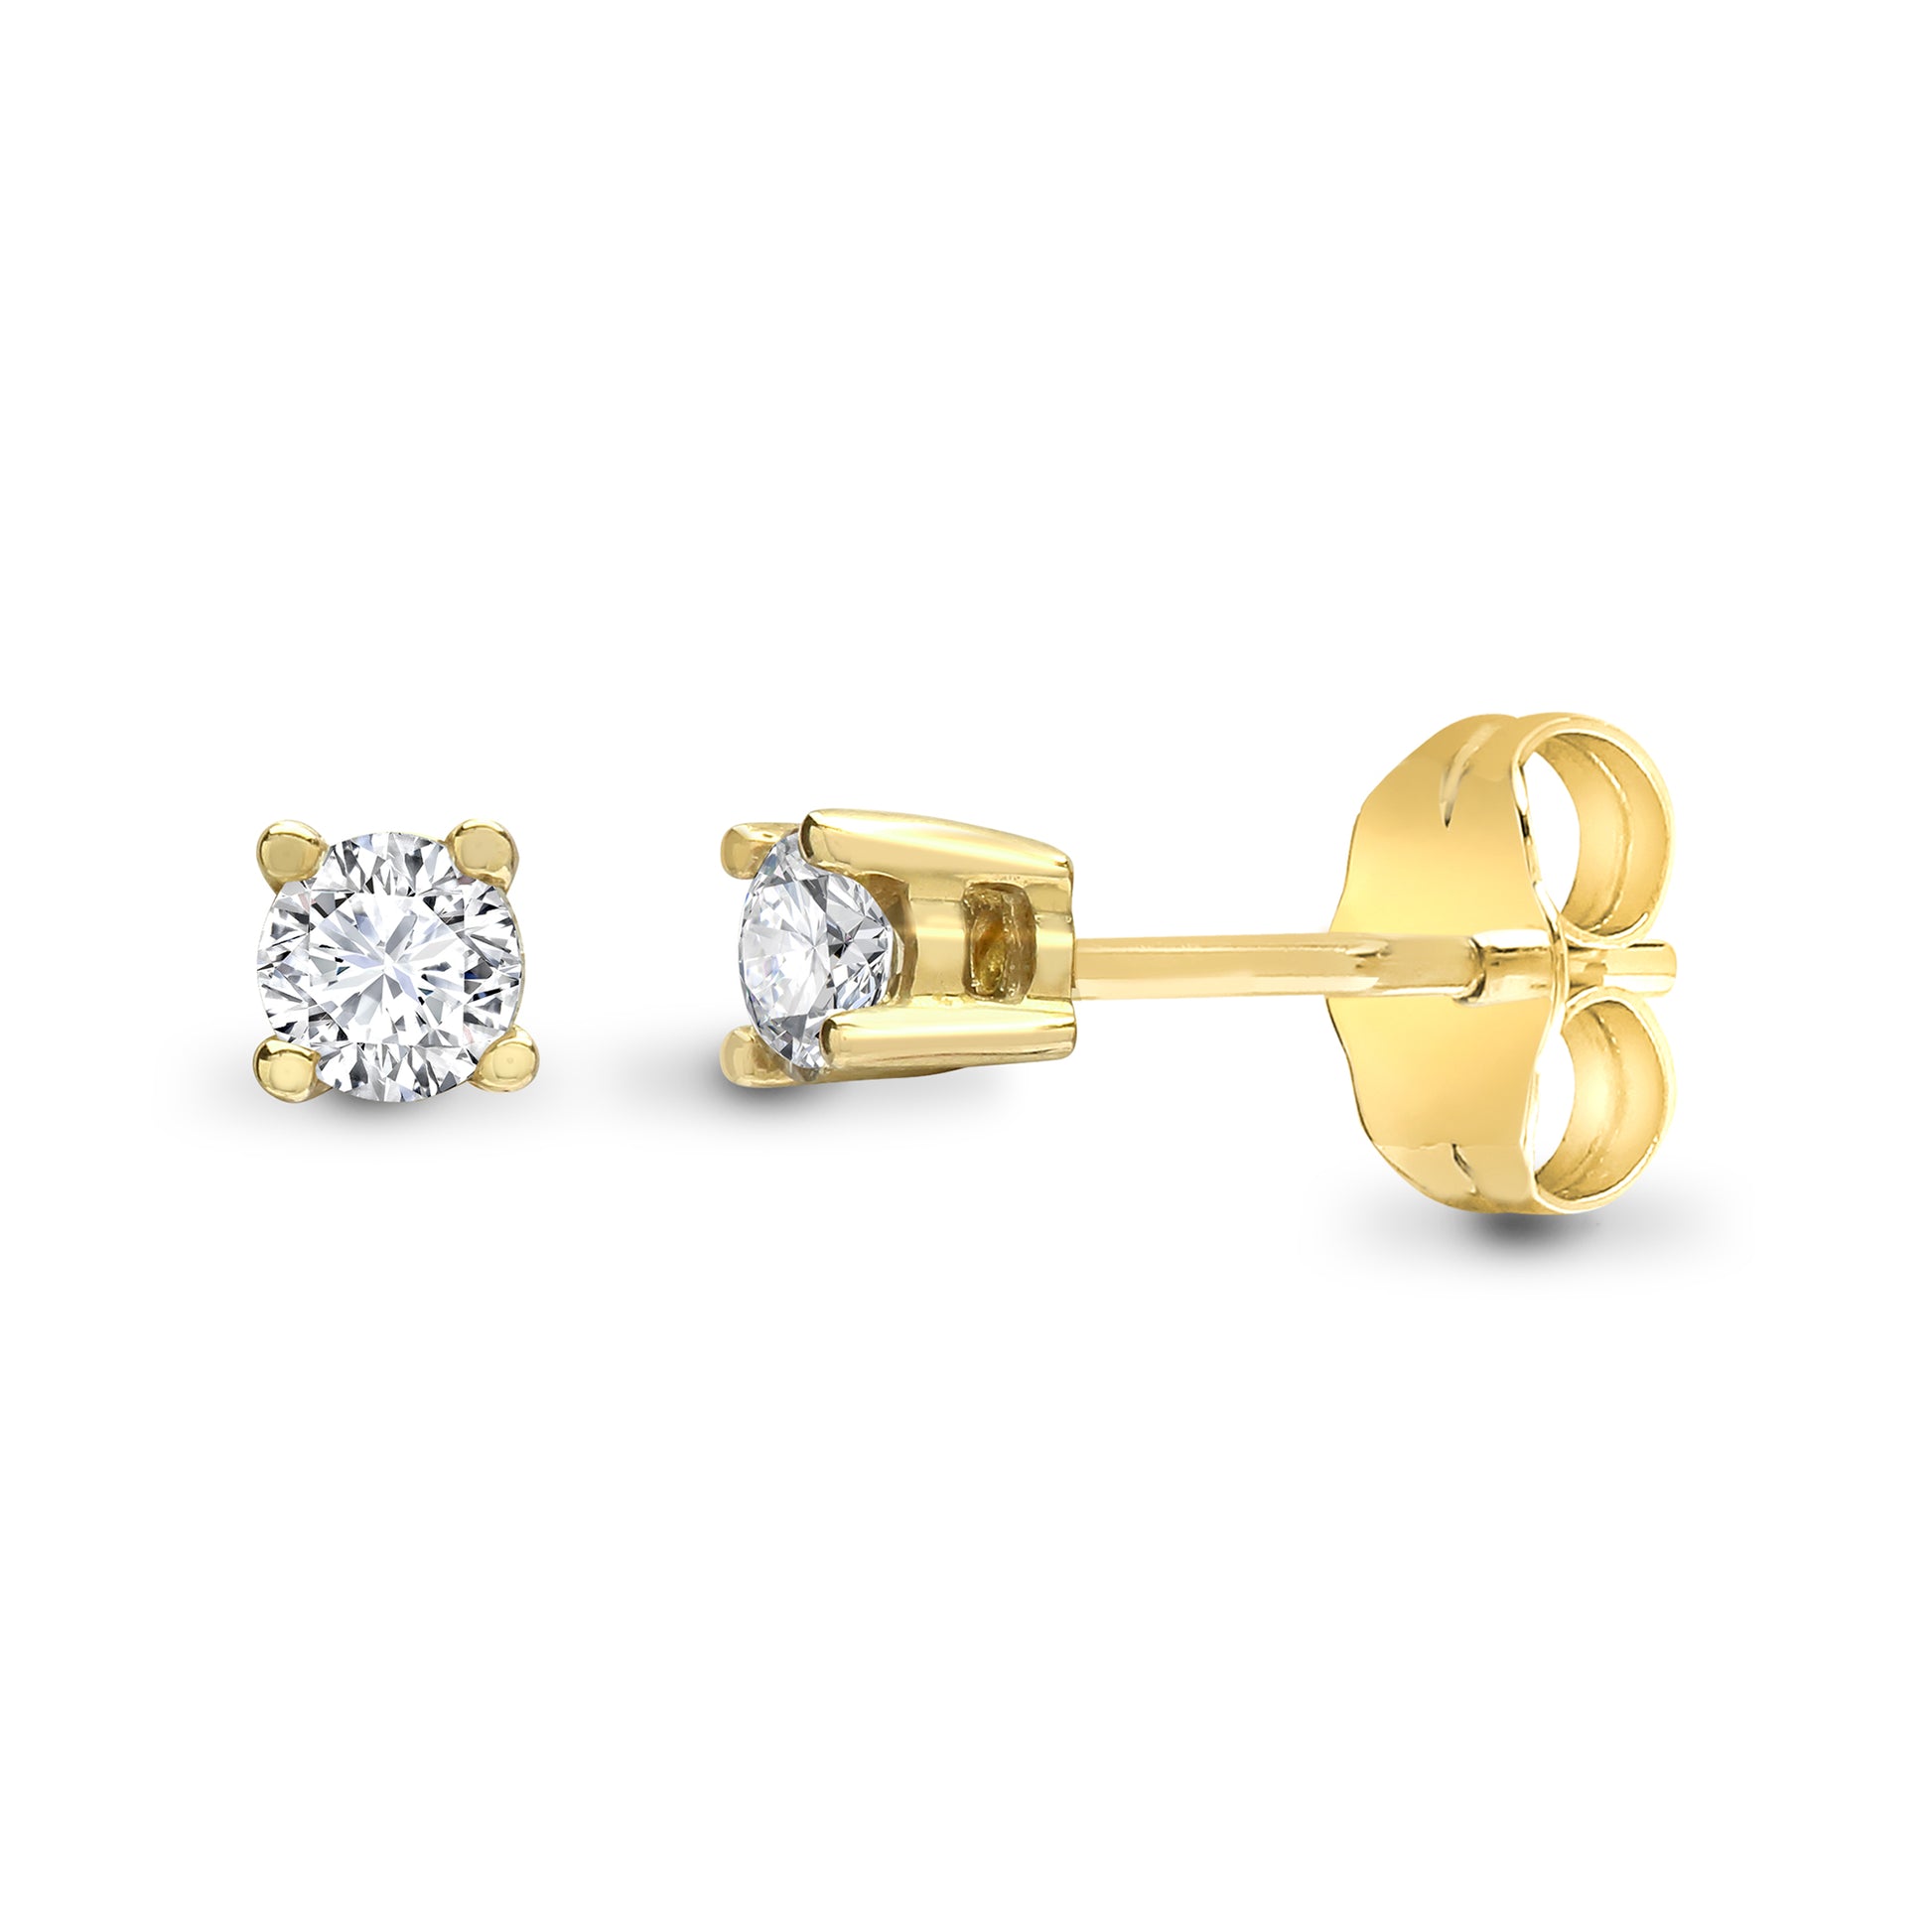 9ct Gold  0.1ct Diamond Solitaire Stud Earrings - 9E092-010